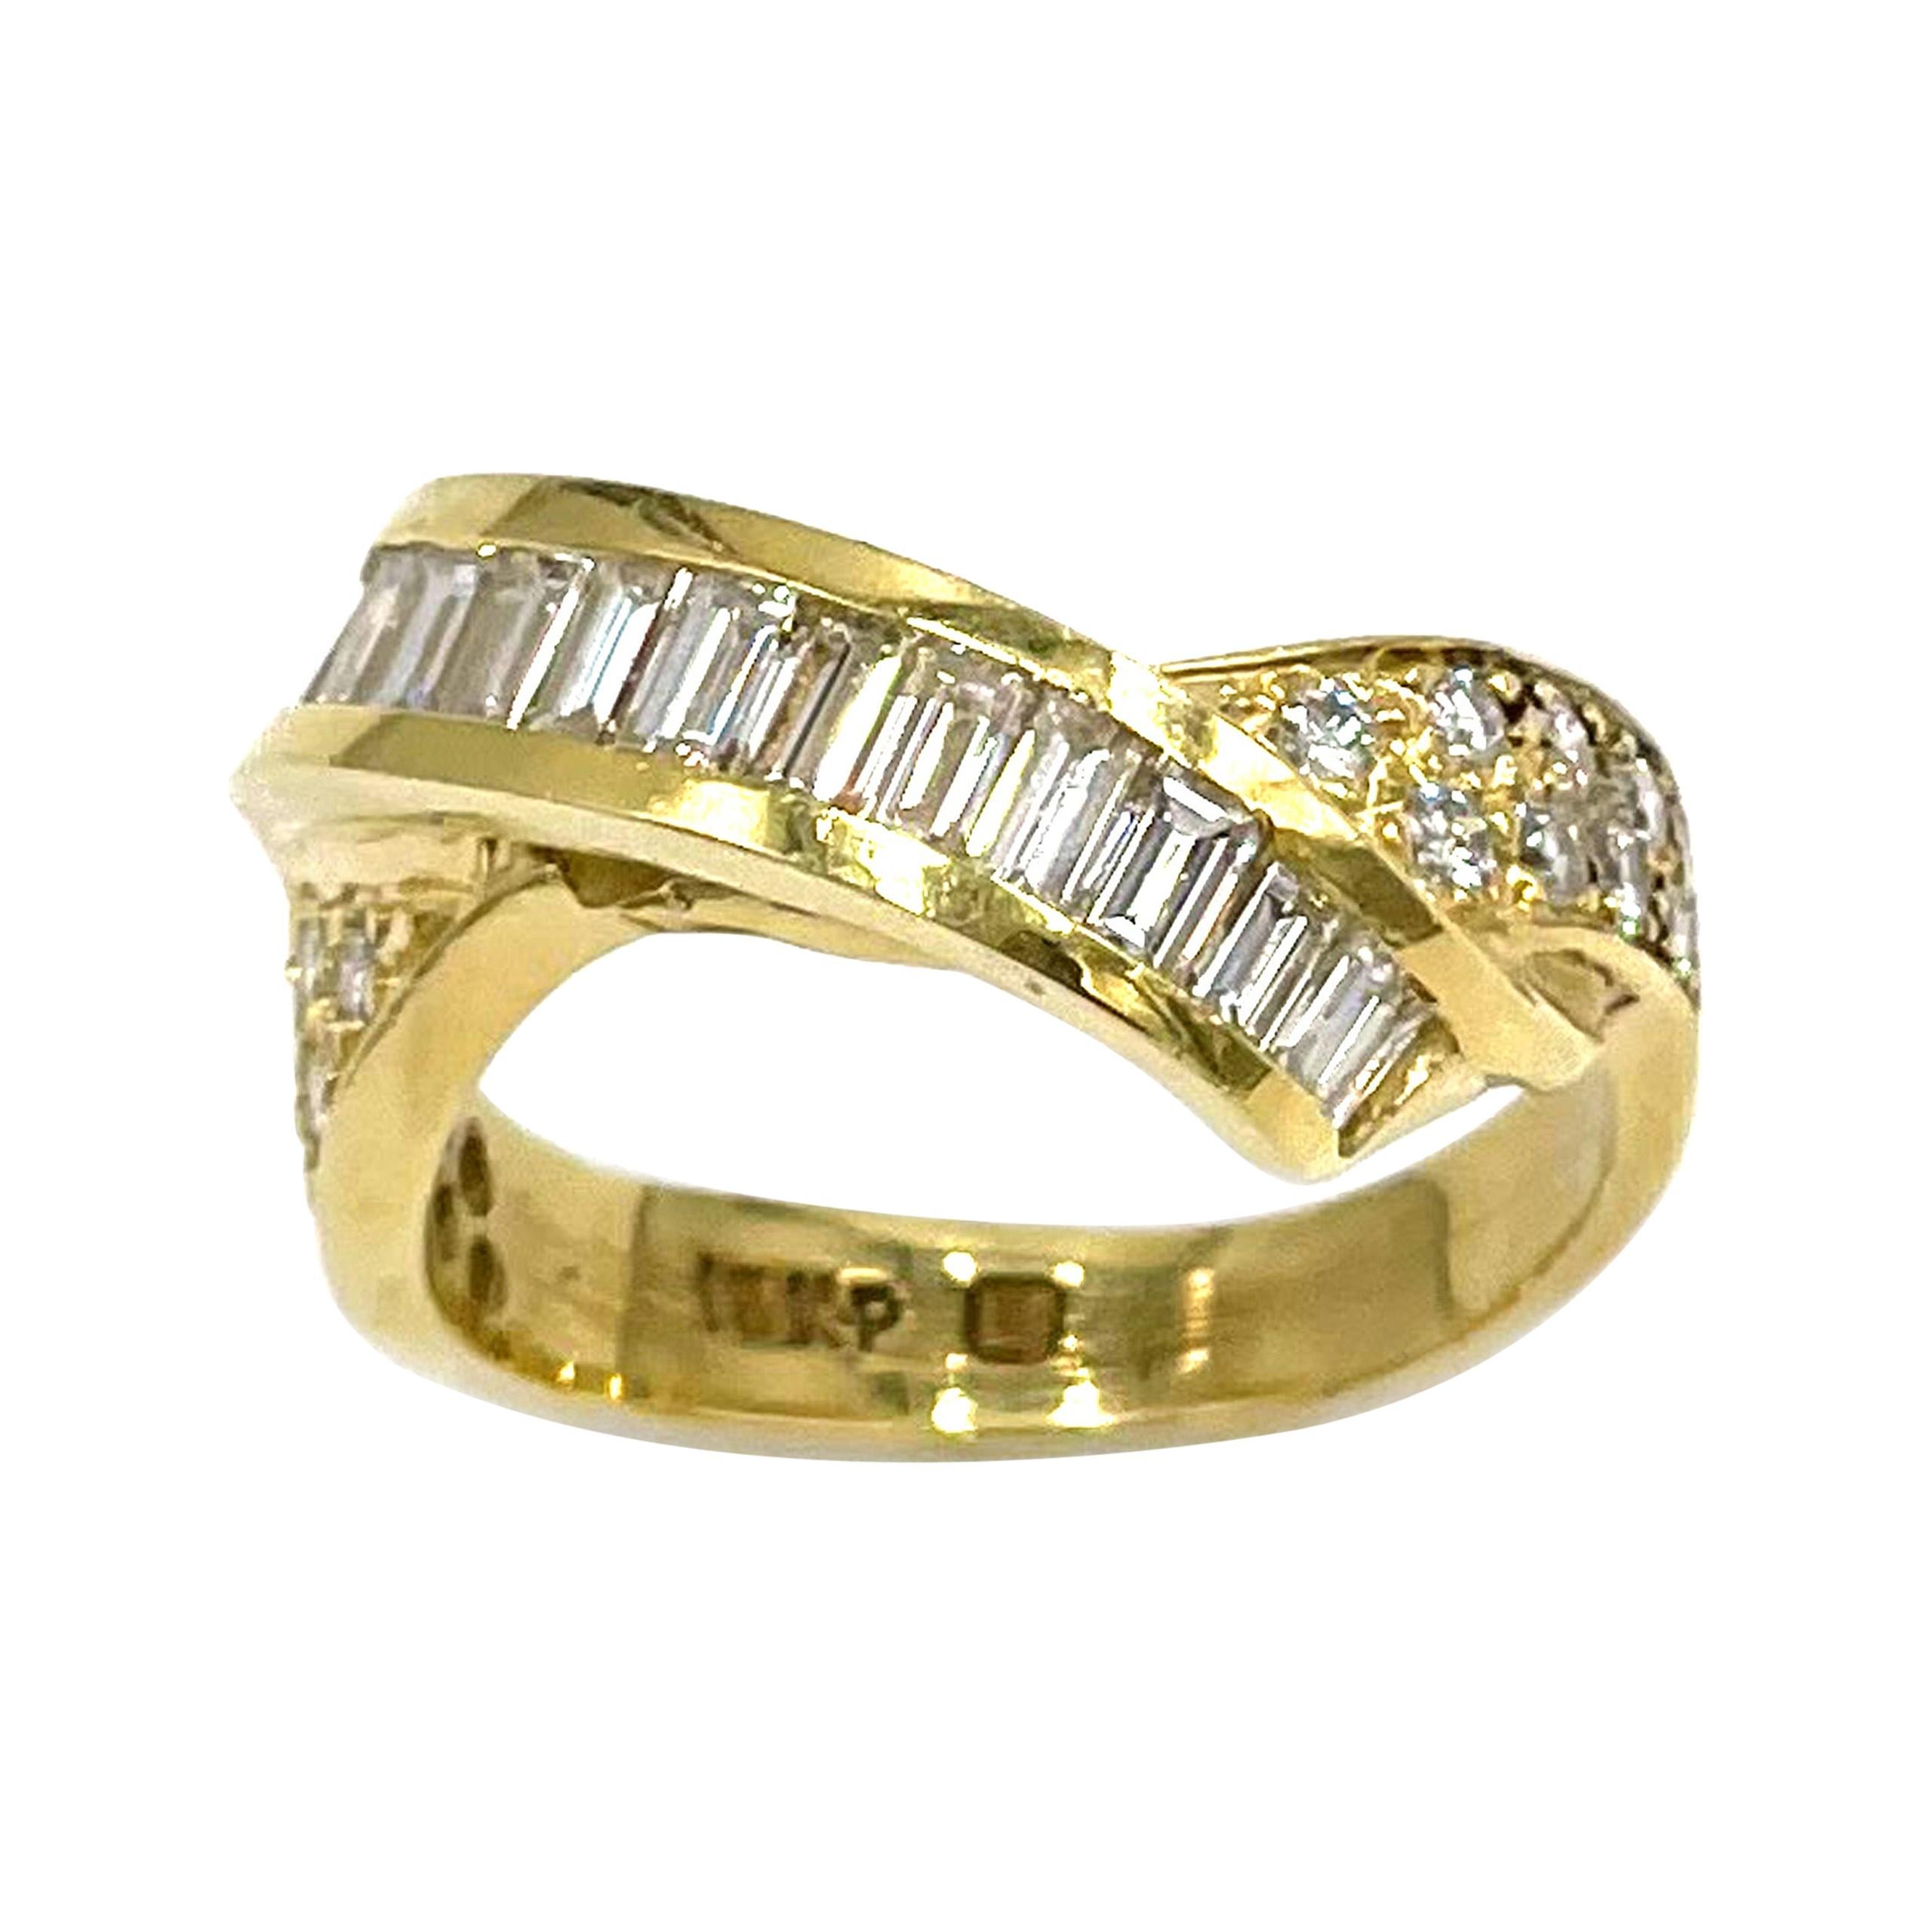 Vintage 18k Yellow Gold Ring with Baguette and Round Diamonds, Circa 1985 For Sale